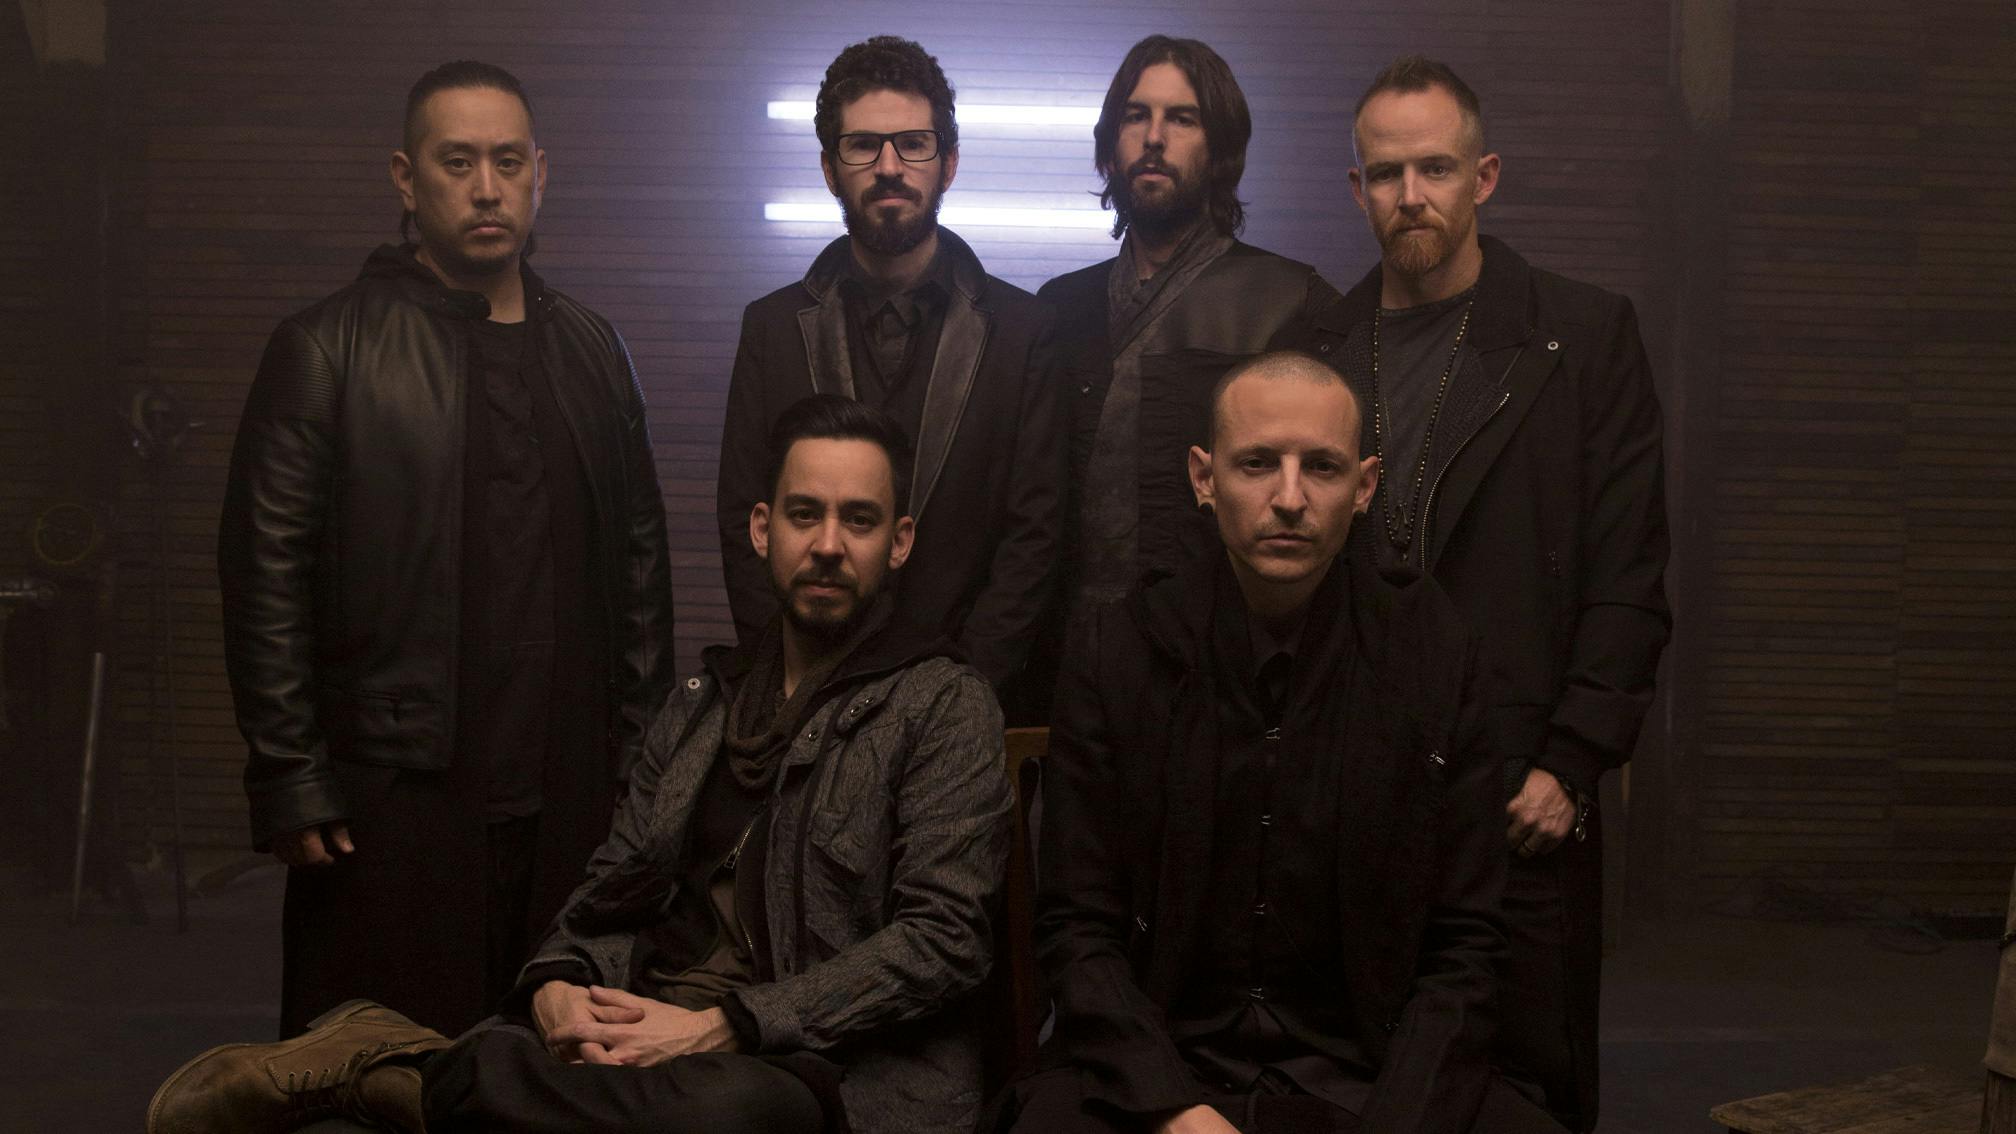 “We got so sick of bands playing it safe the whole time”: The story of Linkin Park’s The Hunting Party